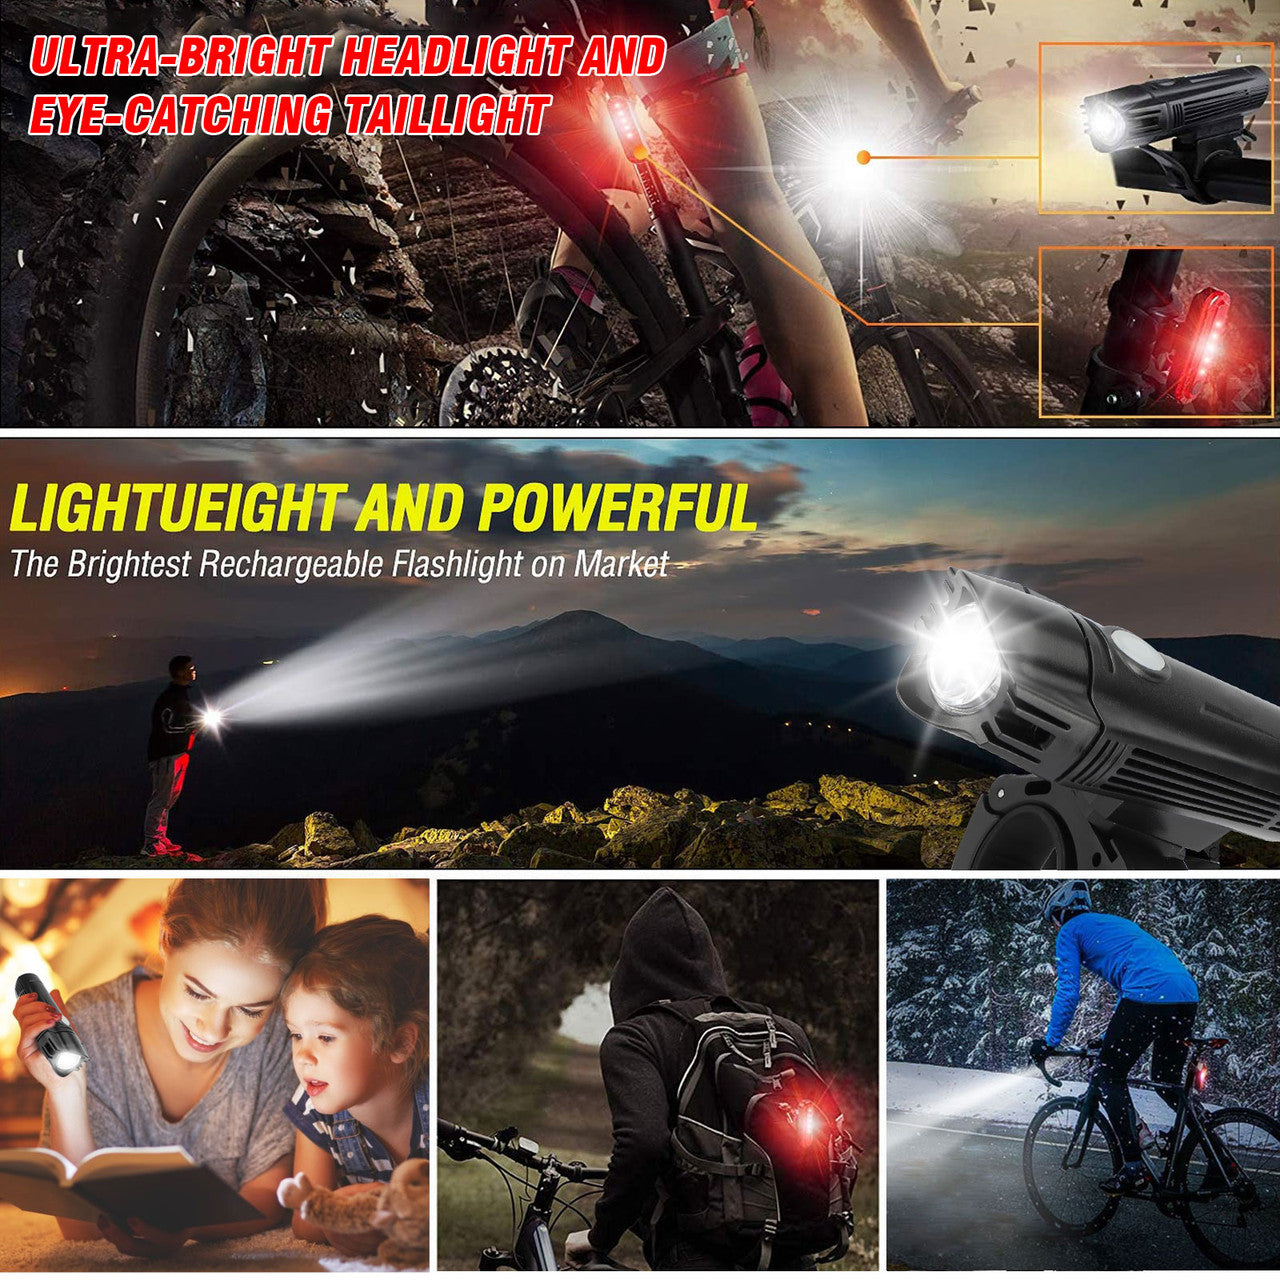 USB Rechargeable LED Bike Light Set, Bicycle Headlight and Taillight Kit, with Mounting Bracket and 4 Light Modes, Waterproof for Kids Men Women Cycling Hiking Camping or Any Outdoor Activity